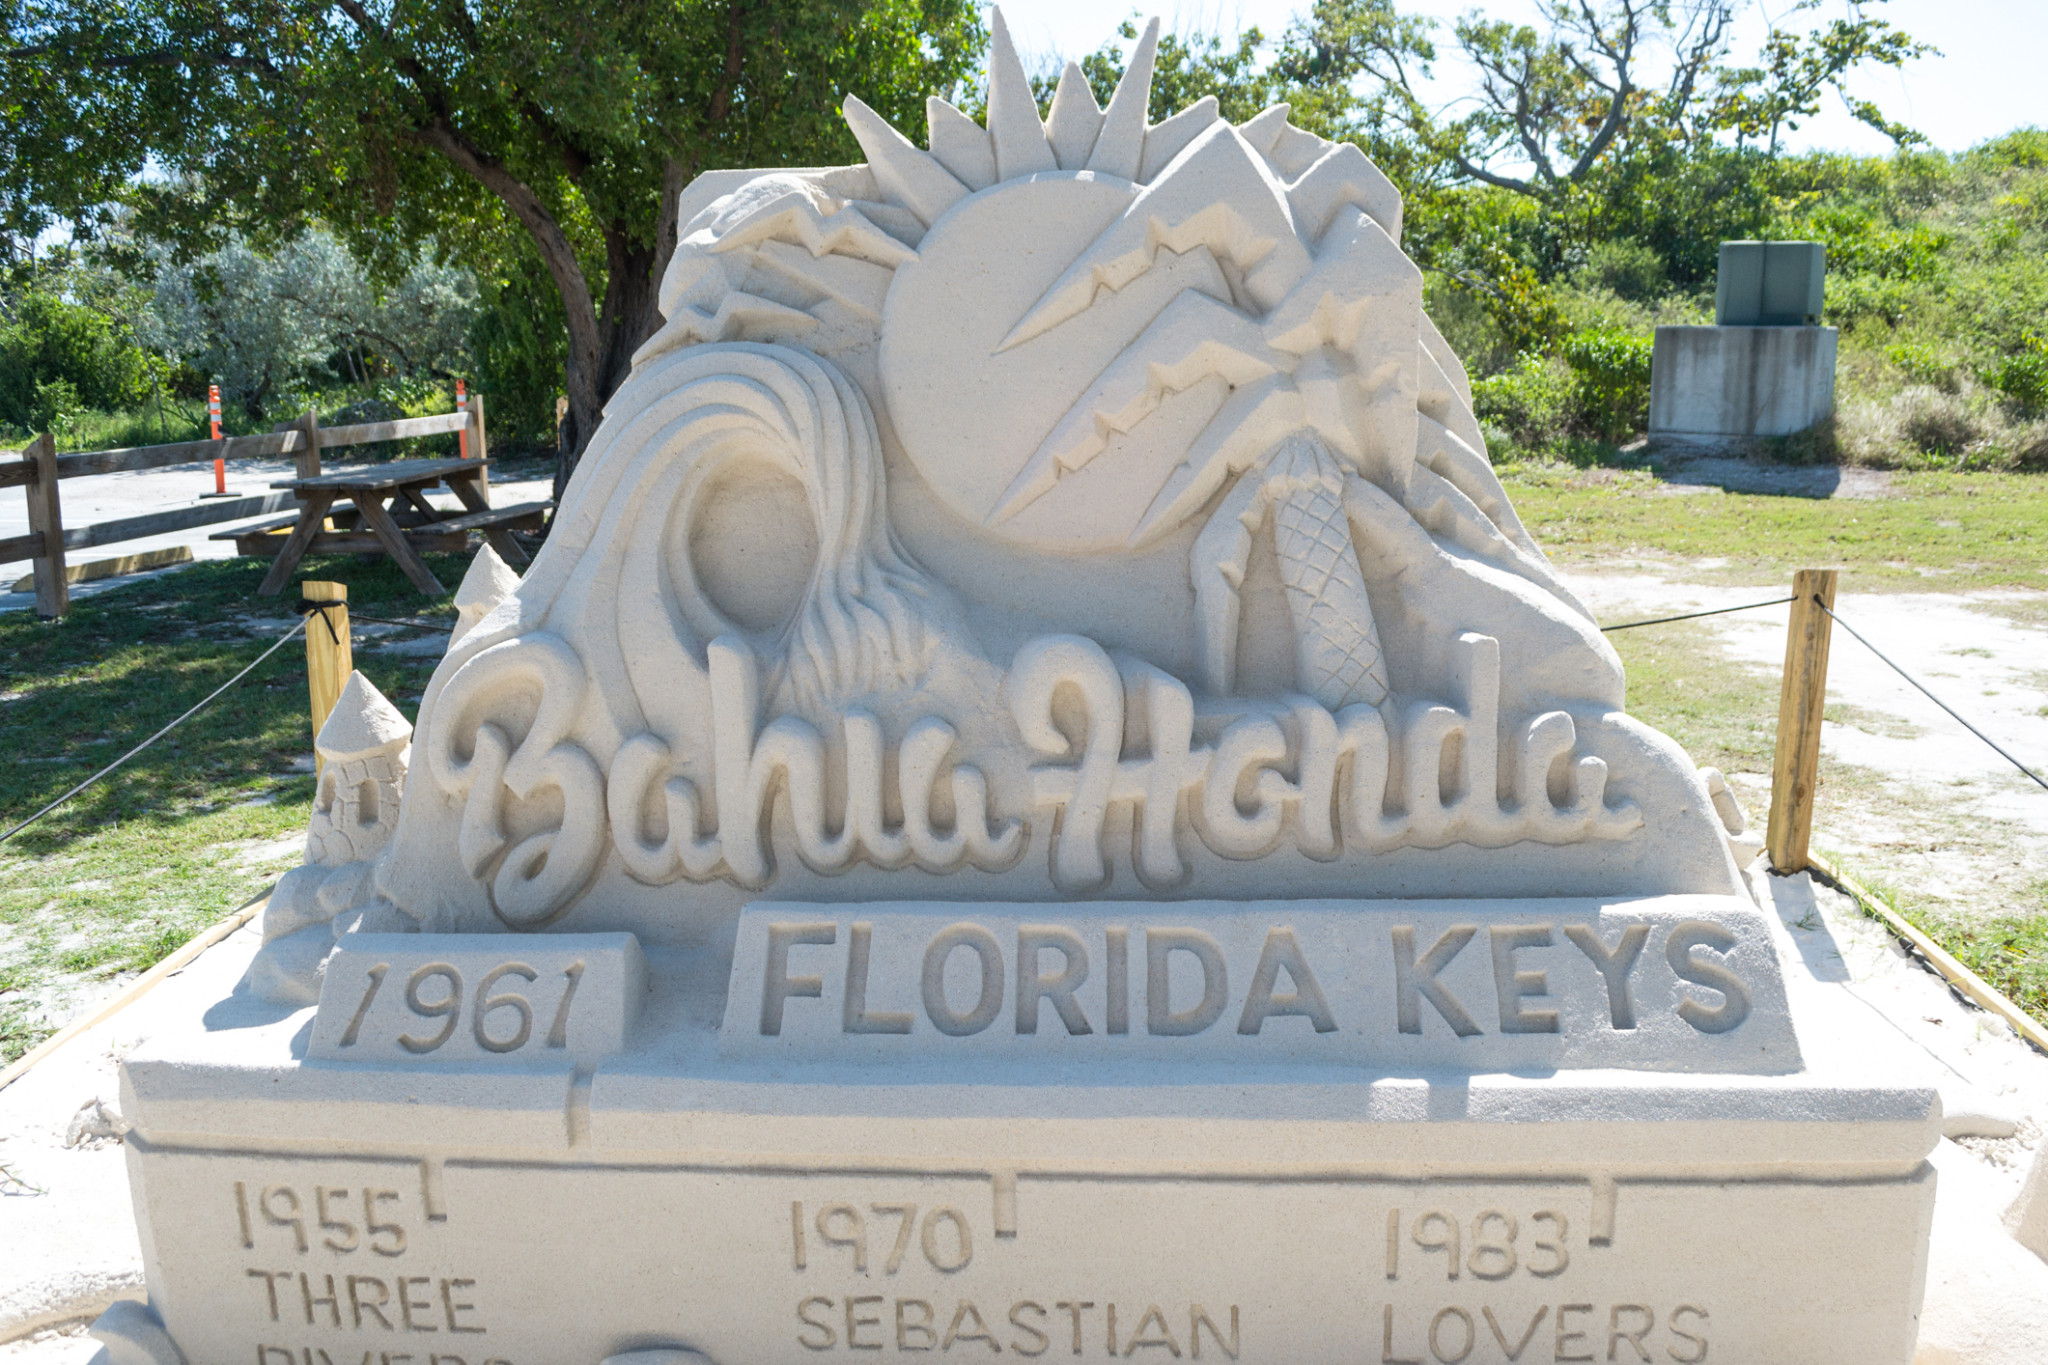 A Bahia Honda sign made entirely of sand!